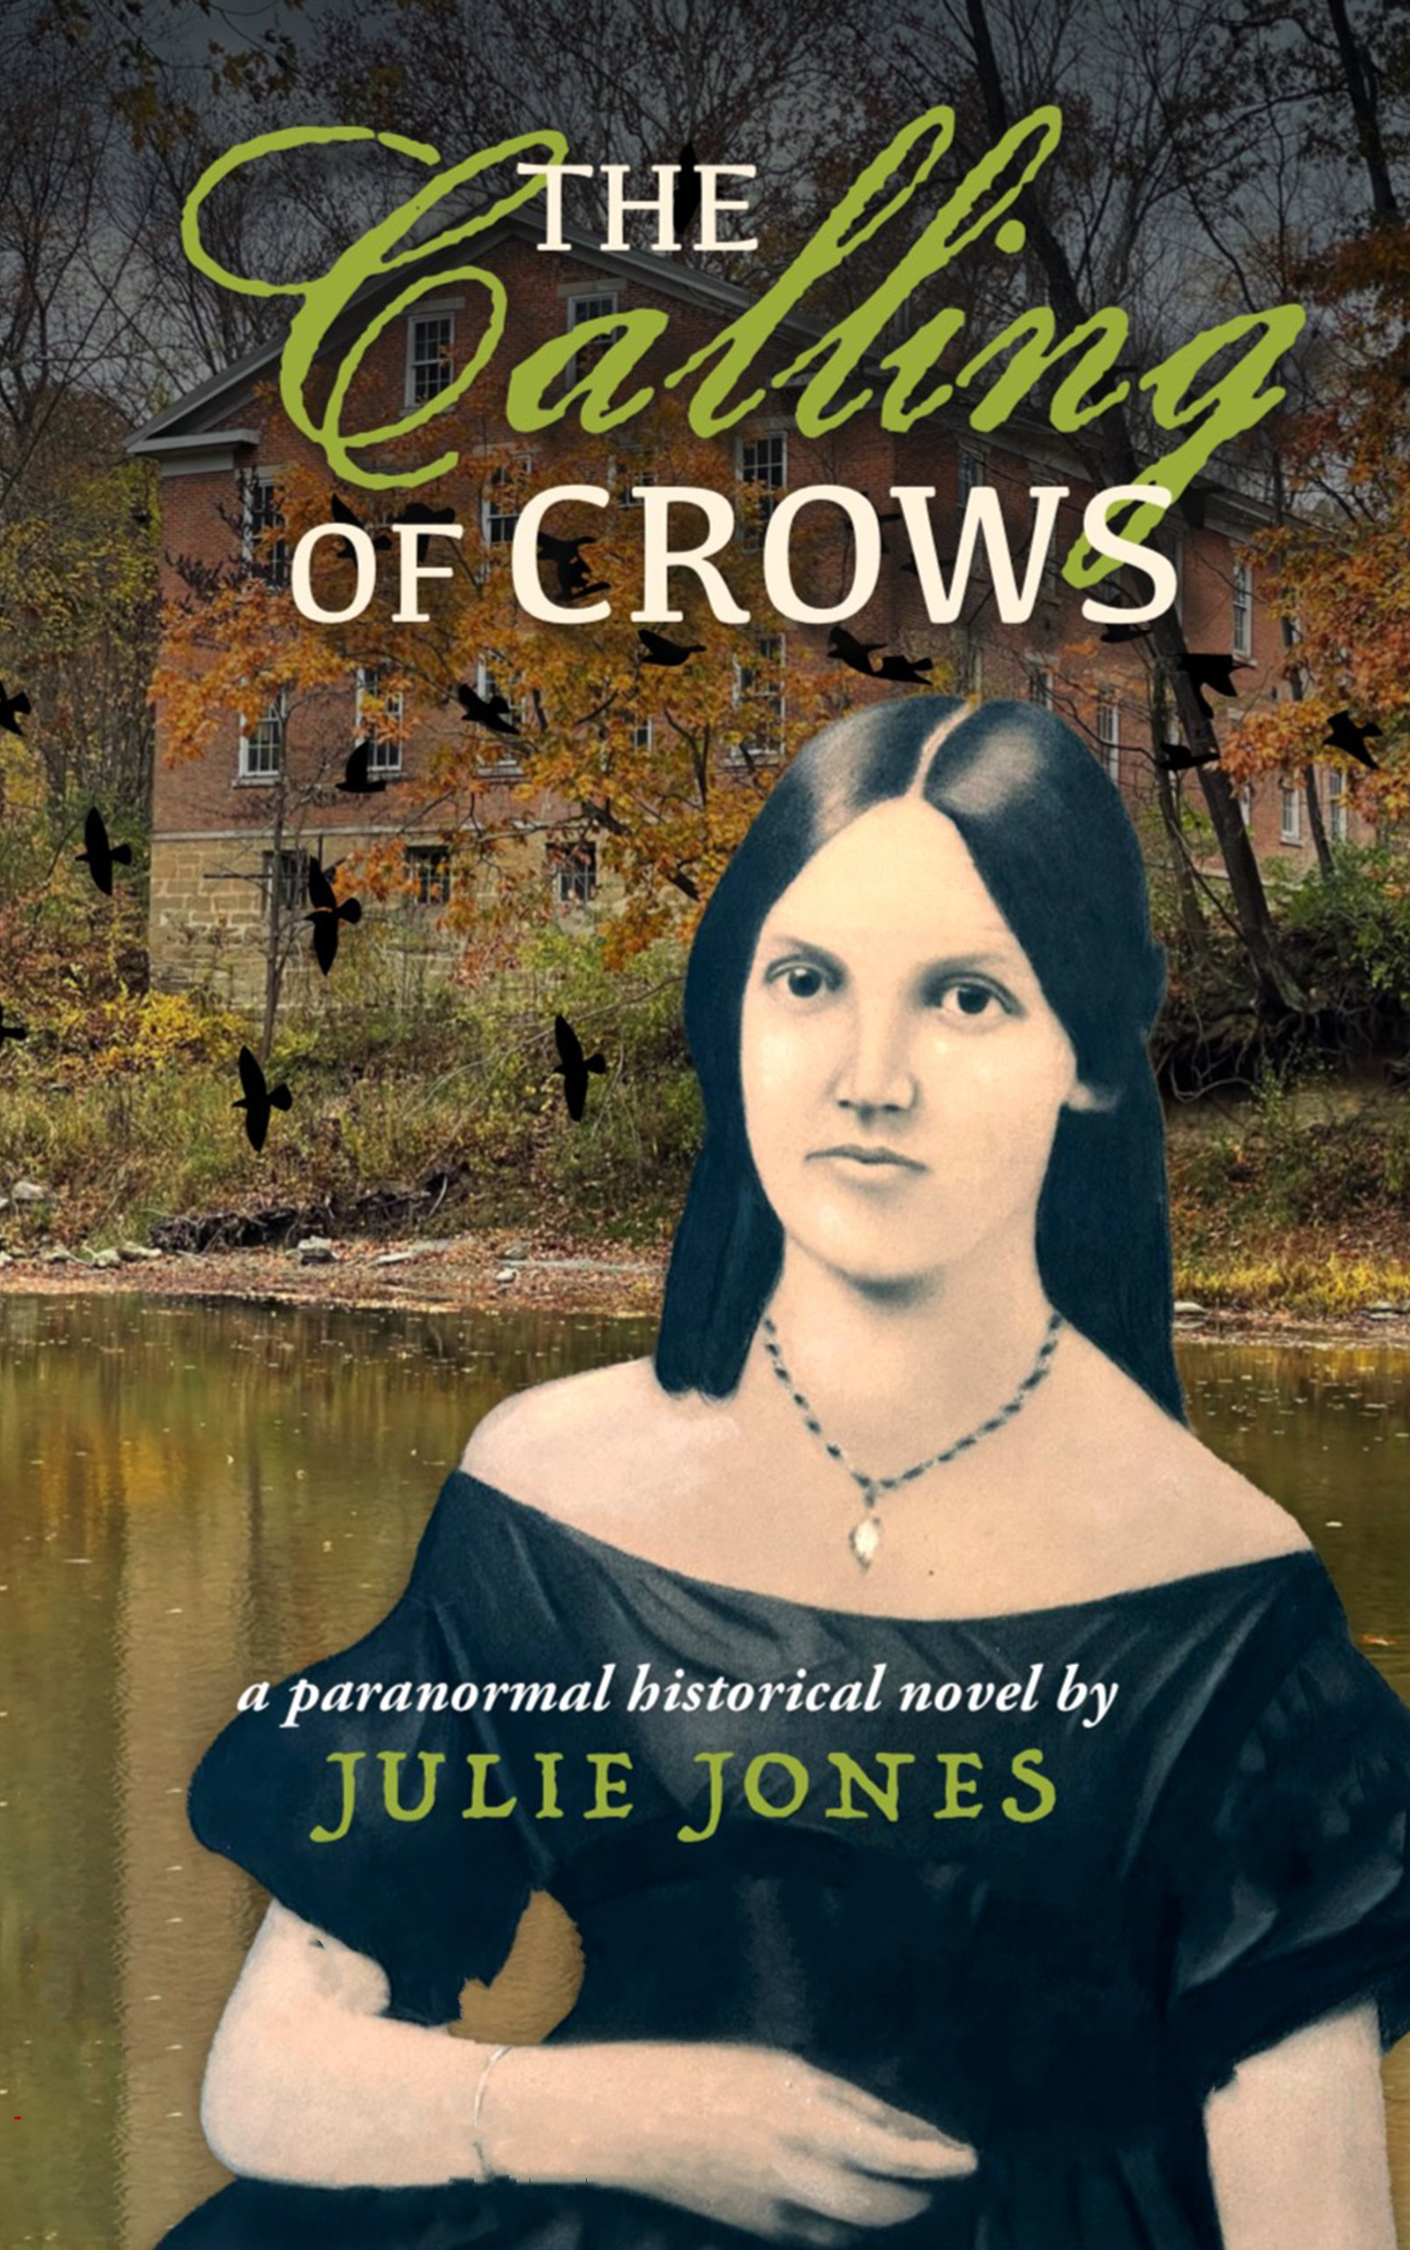 Review of “The Calling of Crows” – A Paranormal Historical Novel by Julie Jones